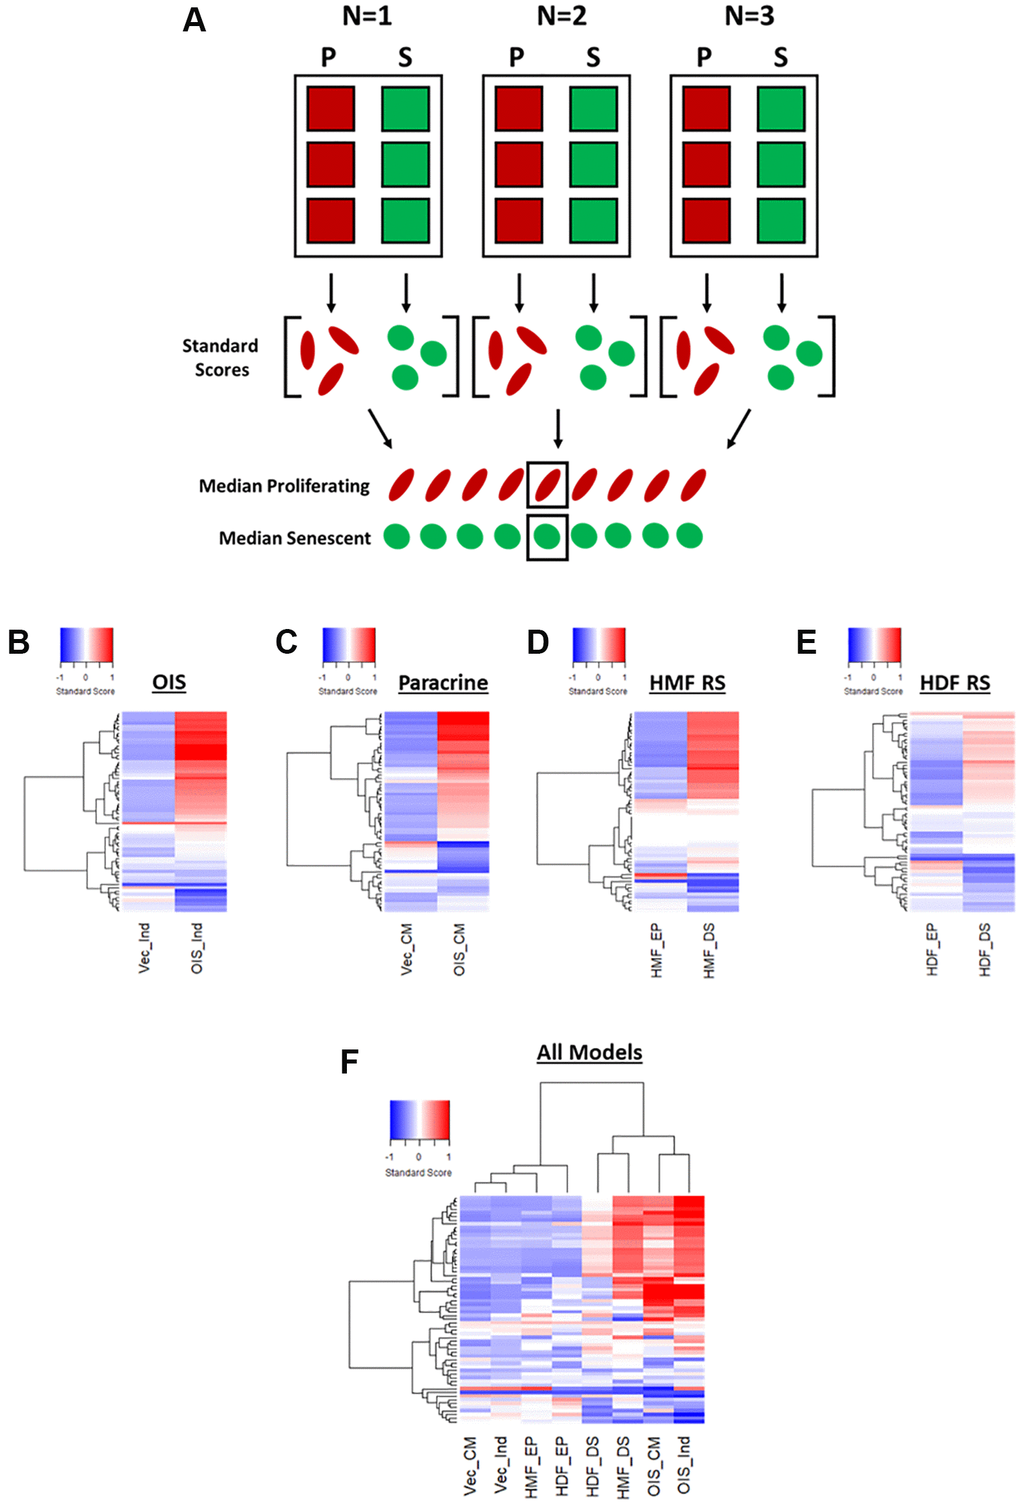 Phenotypic profiling of senescence via standard score profile generation. (A) Schematic overview of data processing proceeding standard-score generation for each senescence model (P: proliferating condition, S: Senescence condition). (B–E) Standard-score profile heatmaps for oncogene-induced senescence (OIS), paracrine senescence (Paracrine), HMF replicative senescence (HMF RS) and HDF replicative senescence (HDF RS) models. Y-axis comprises 62 morphological features (Red = positive modulation, Blue = negative modulation), White = no change). Proliferating conditions: vector induction (Vec